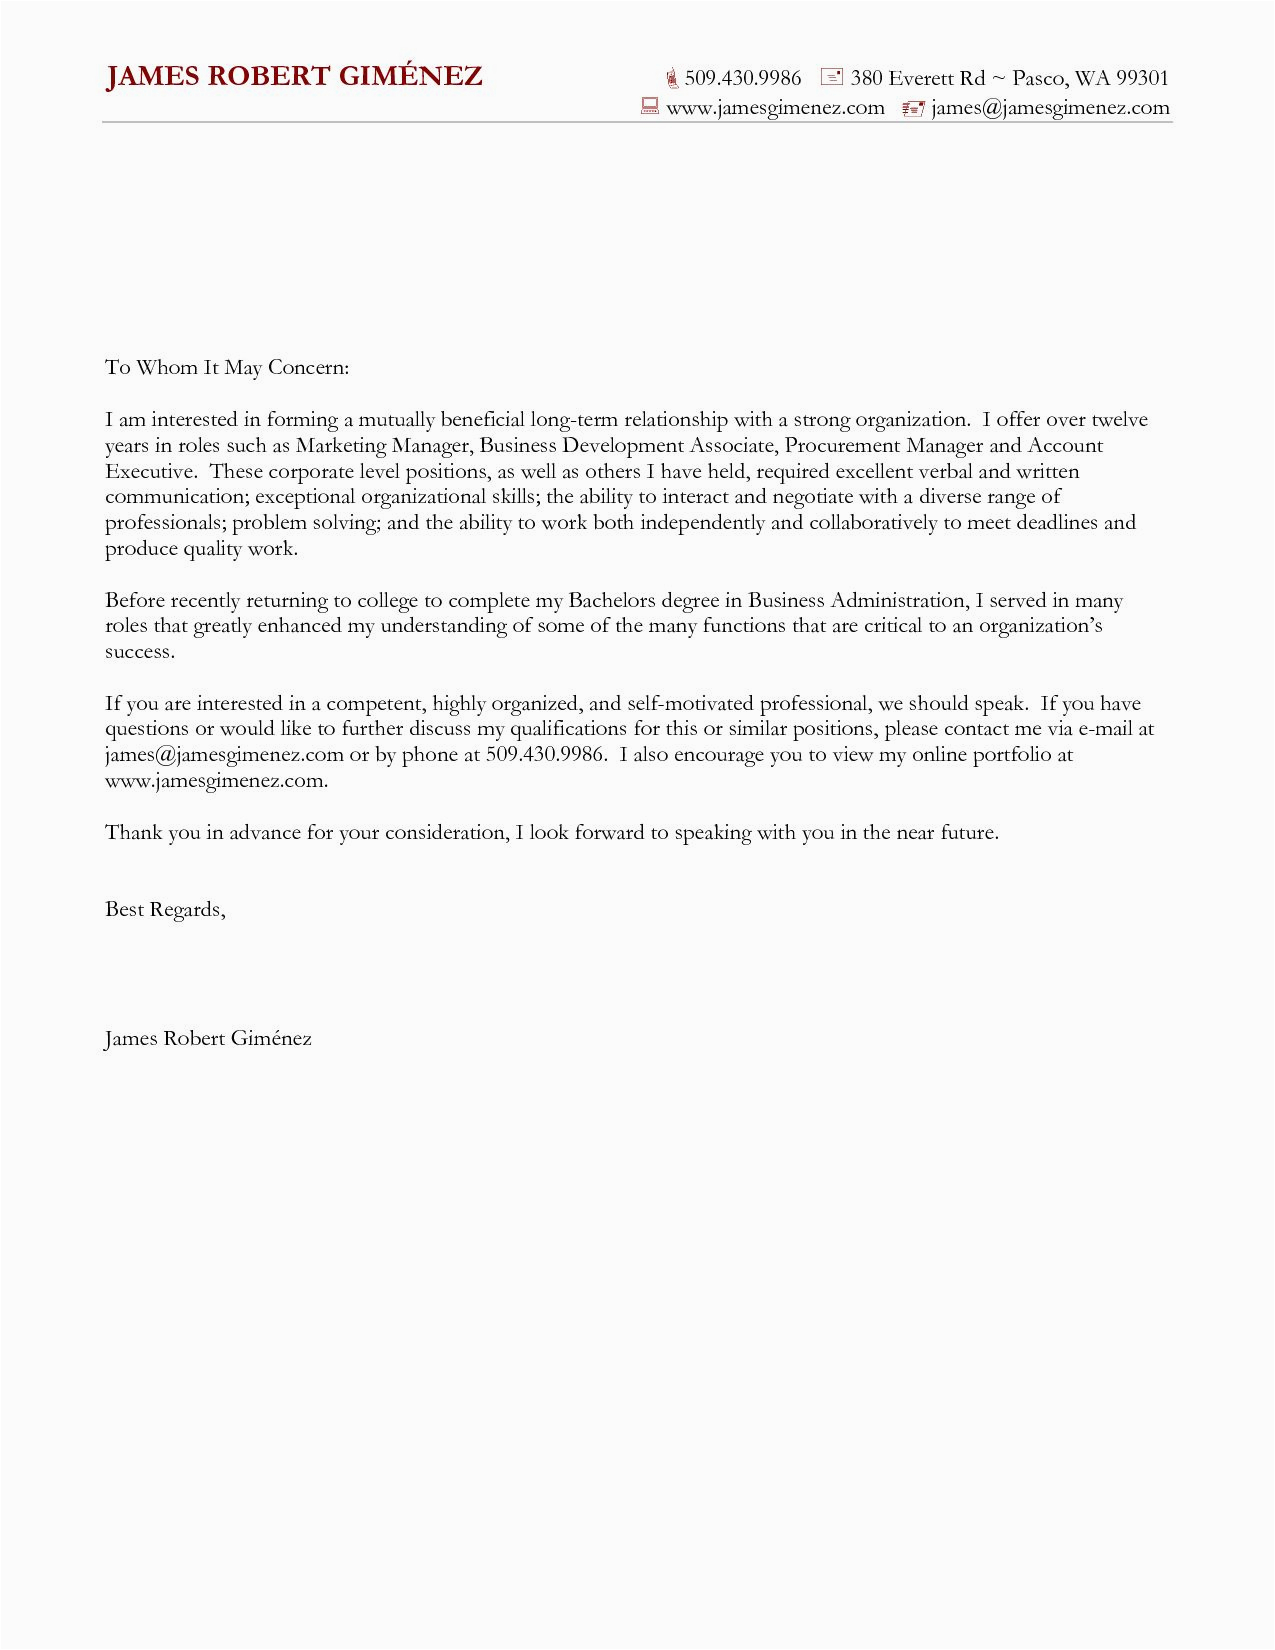 Generic Cover Letter Template for Resume General Cover Letter Examples Beautiful Cover Letter for